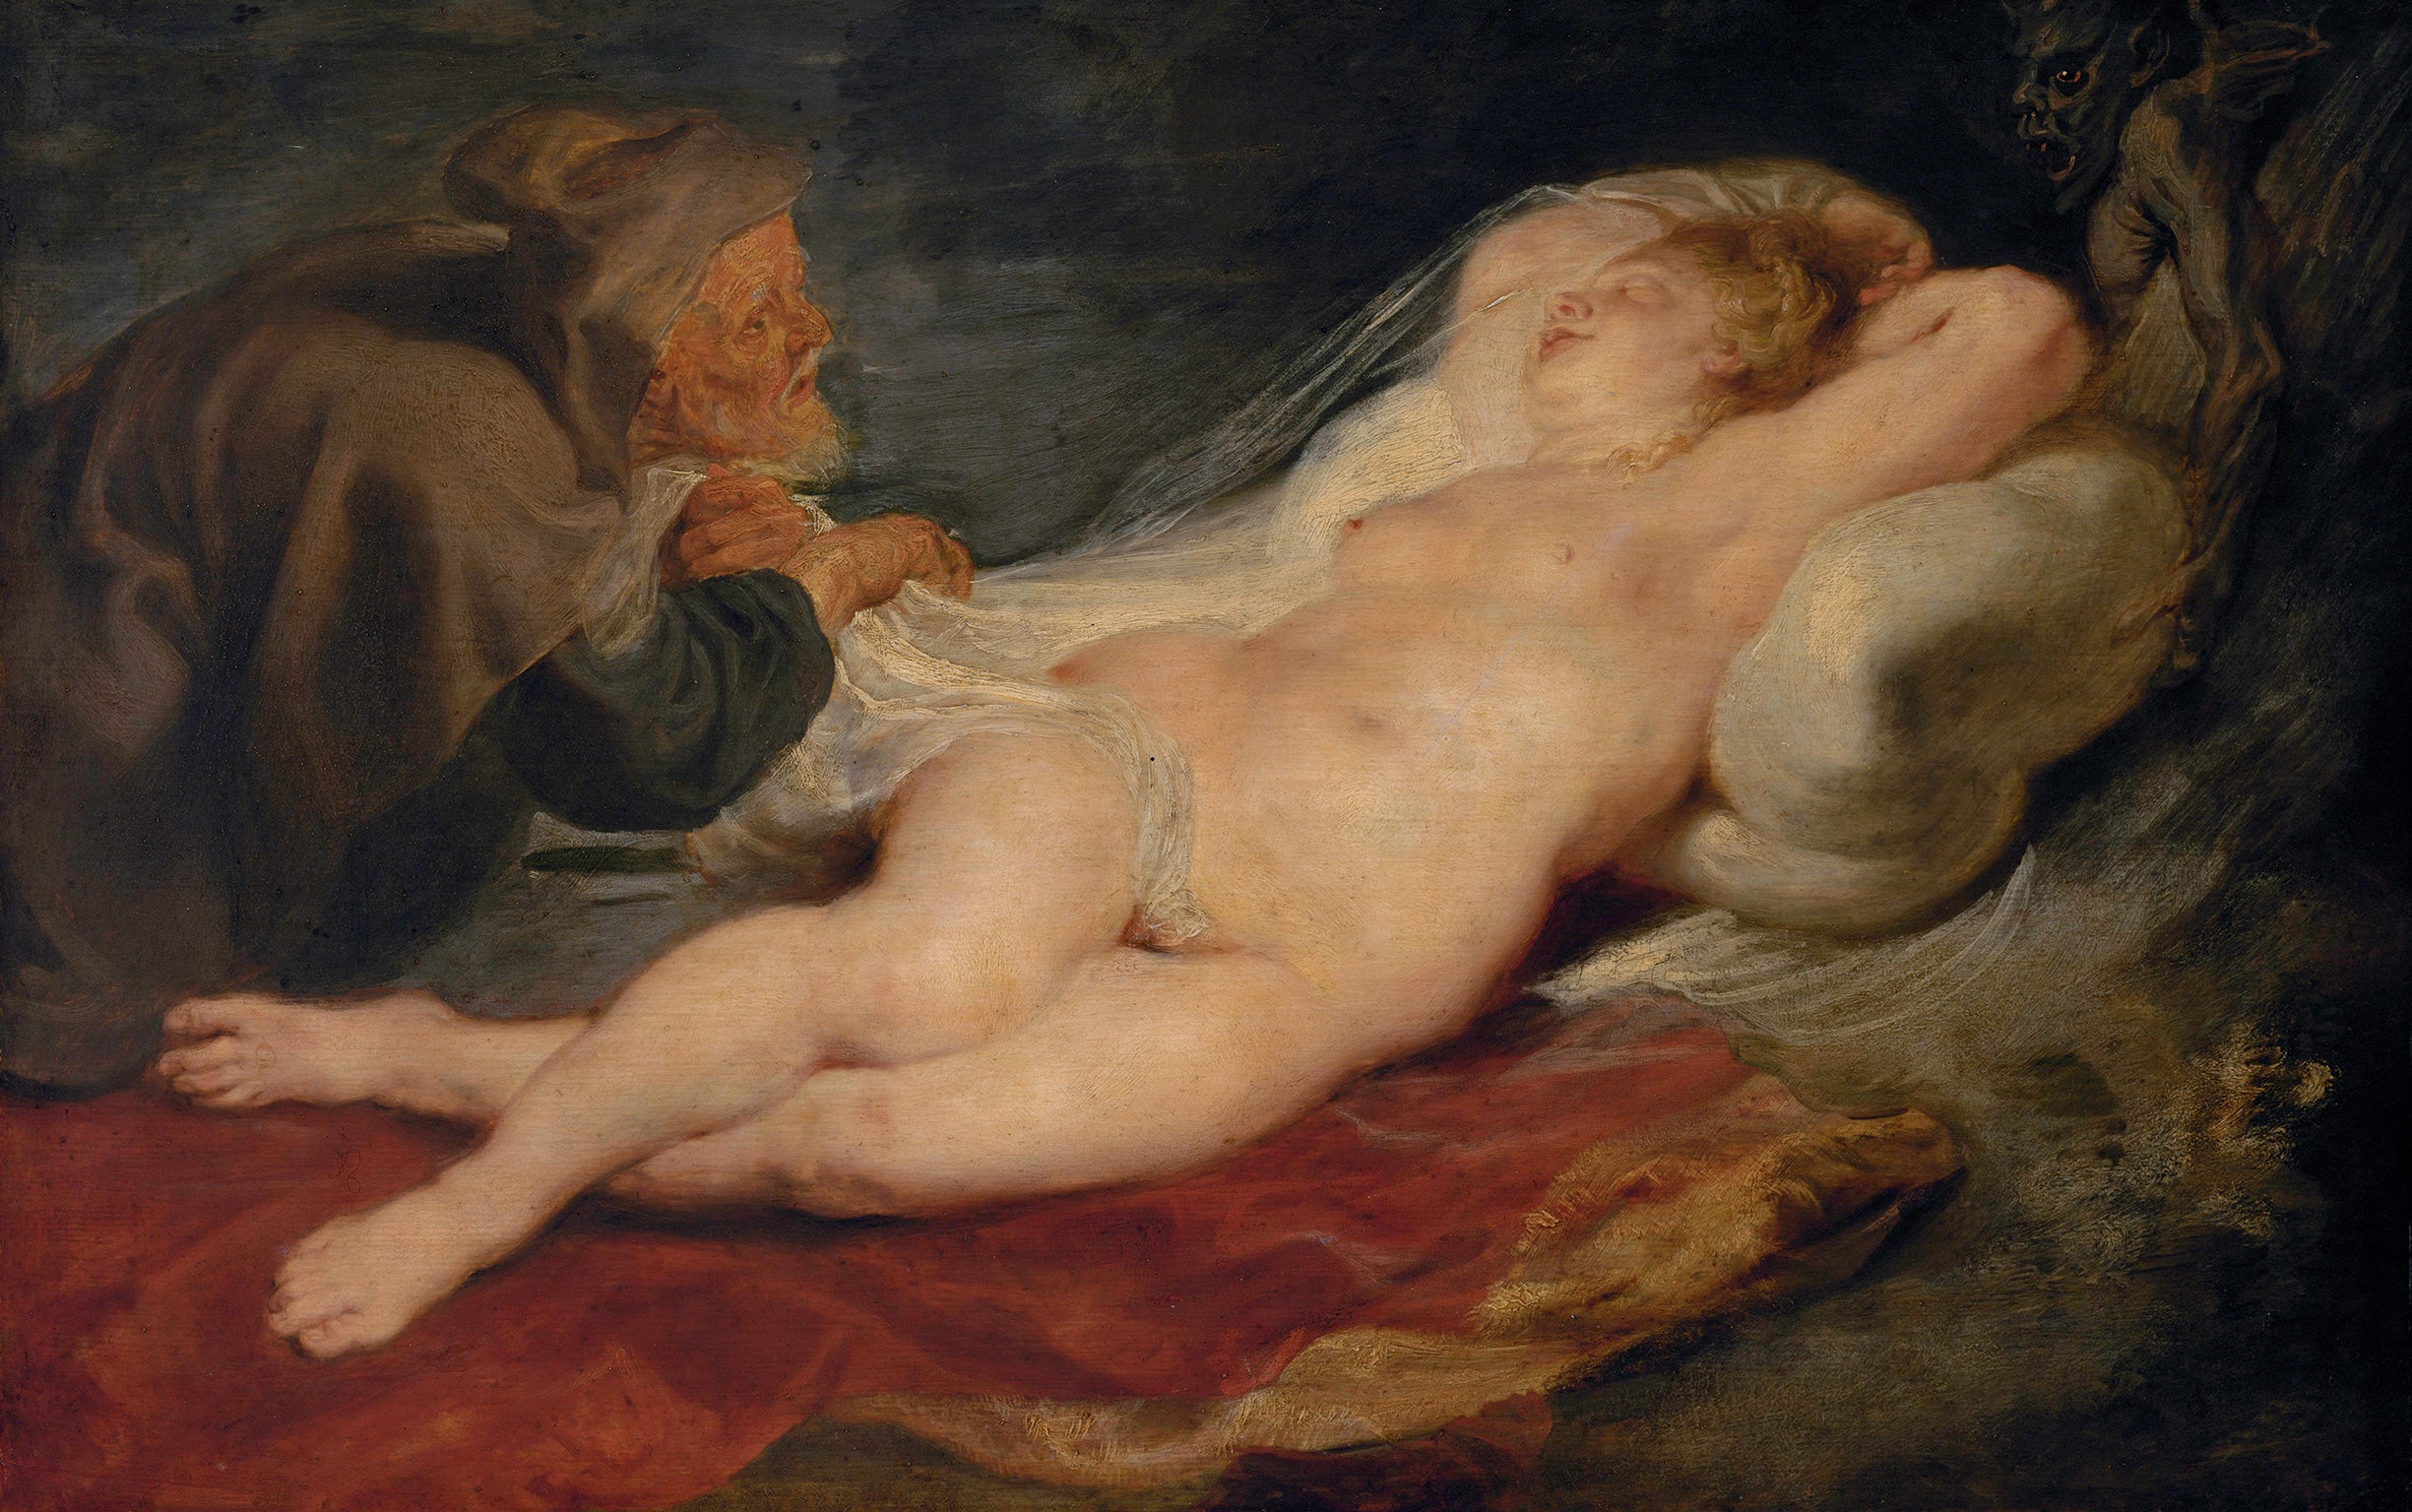 ‘The Hermit and the Sleeping Angelica’ (1626-8) by Rubens